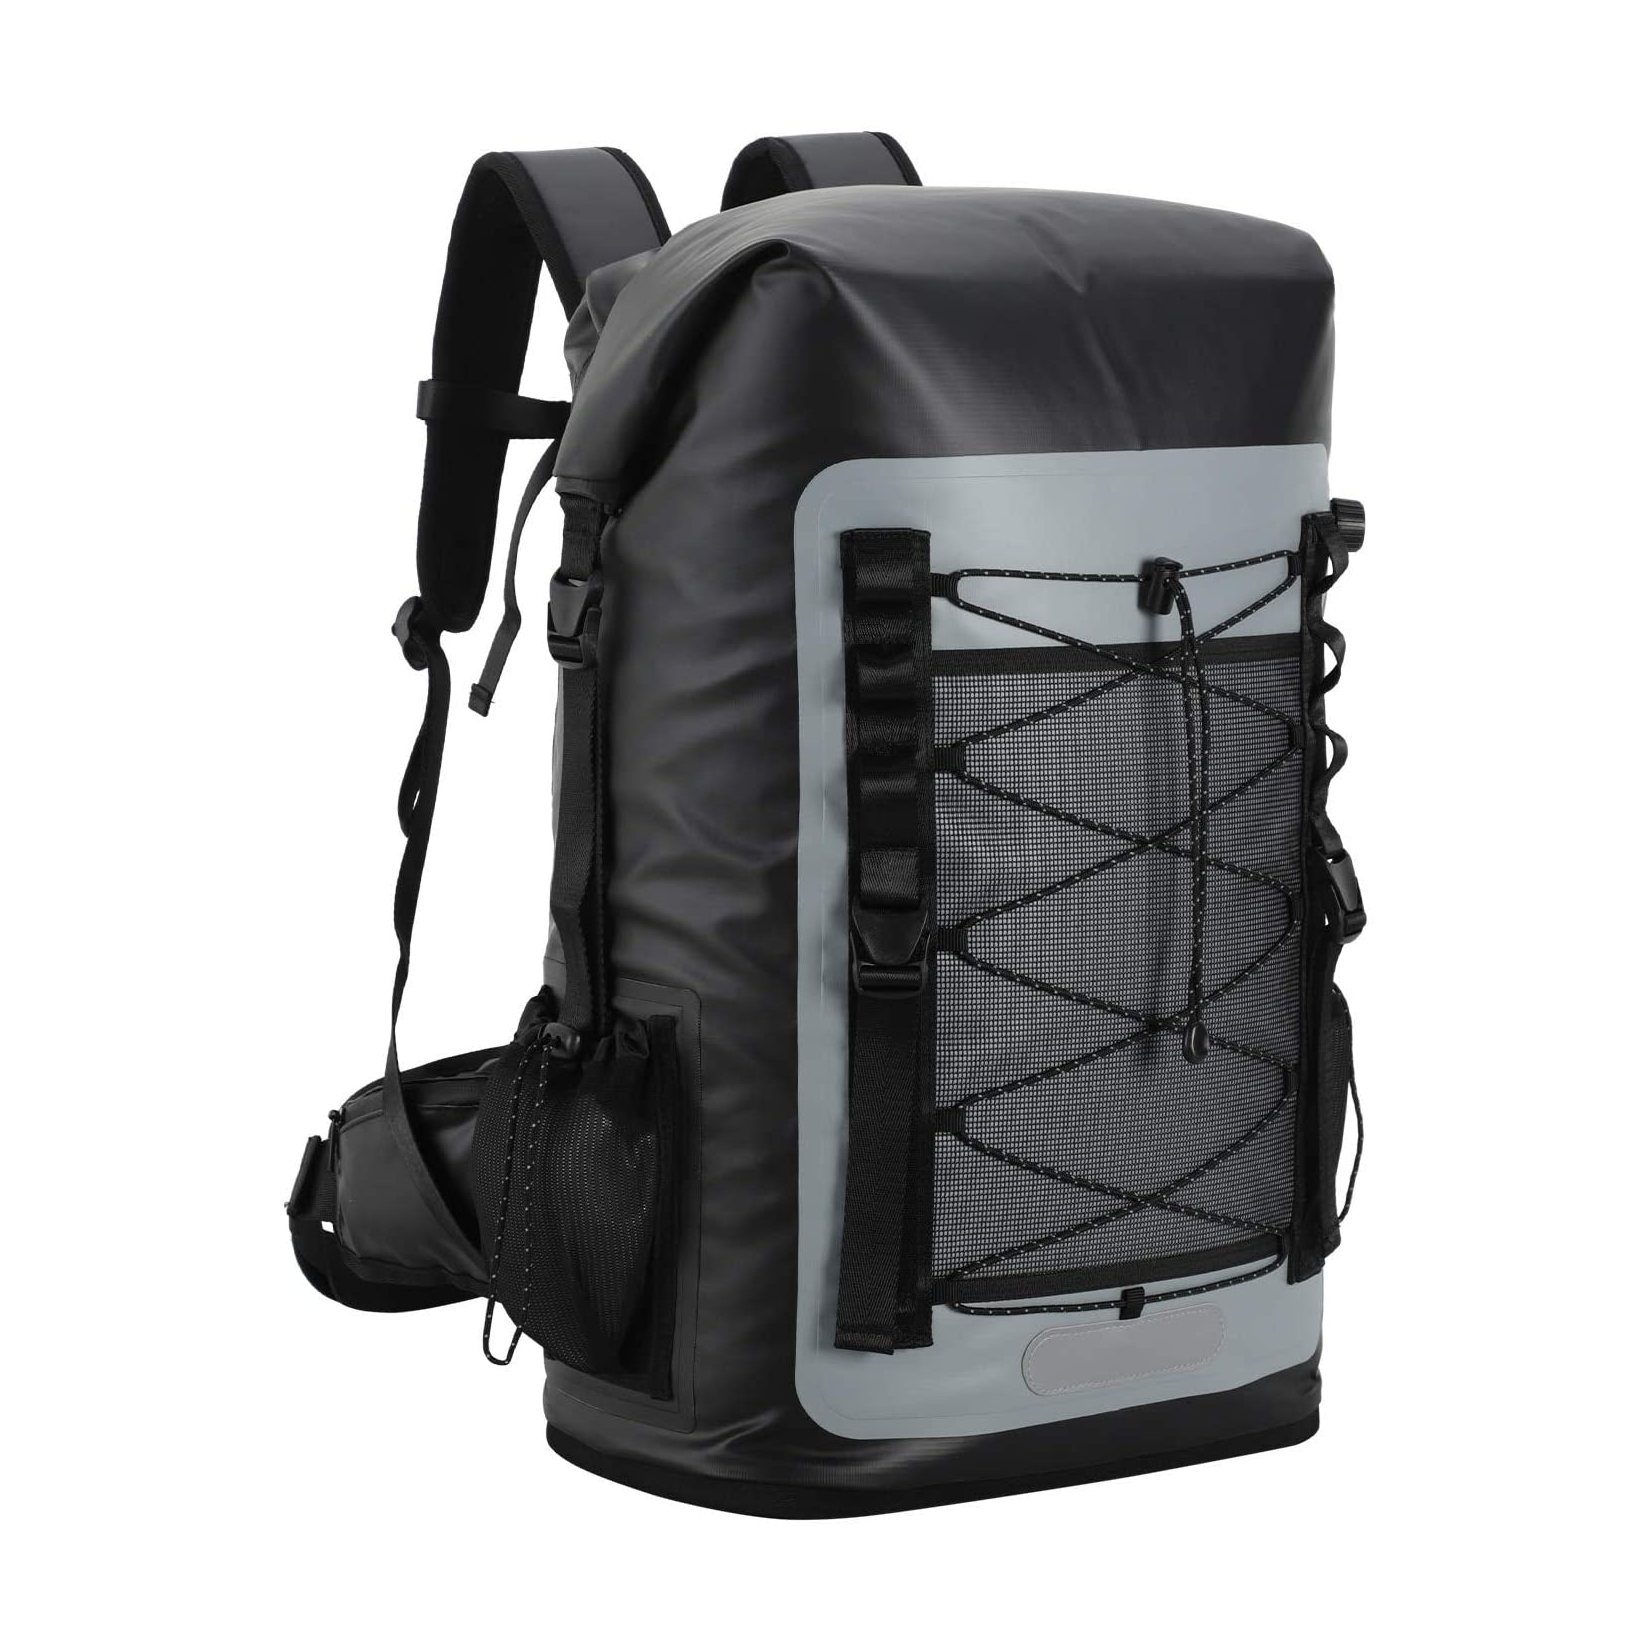 https://backpacks.global/compare/wp-content/uploads/MIER-Waterproof-Insulated-Backpack-Cooler-Front-View.png